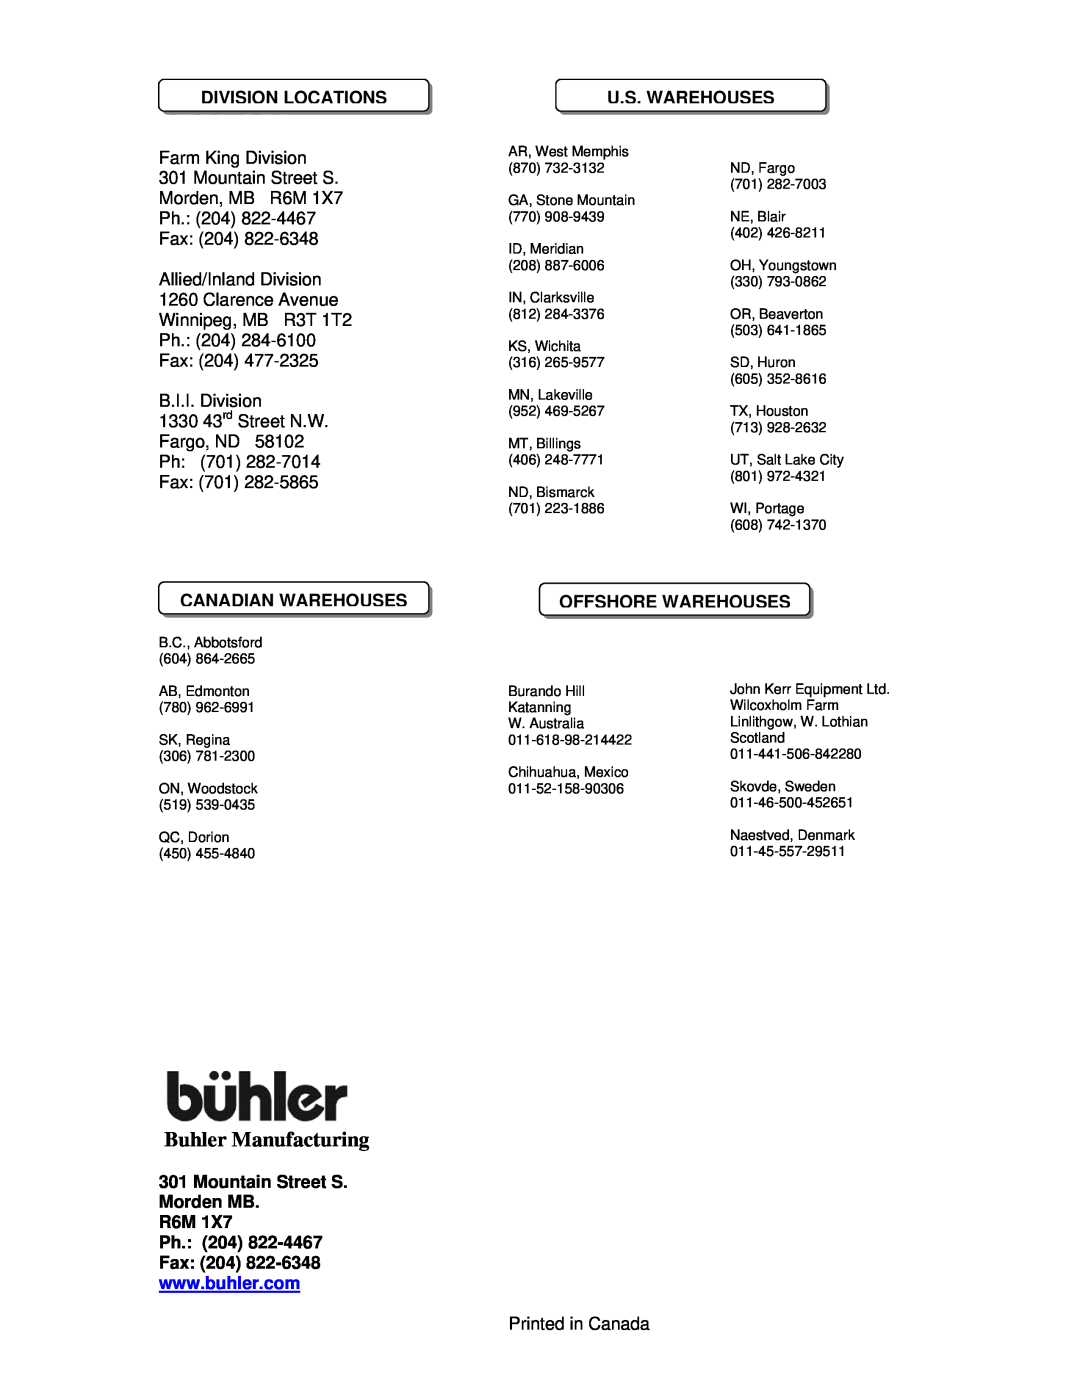 Buhler FK352 manual Buhler Manufacturing, Division Locations, Farm King Division 301 Mountain Street S, Ph 701 Fax 